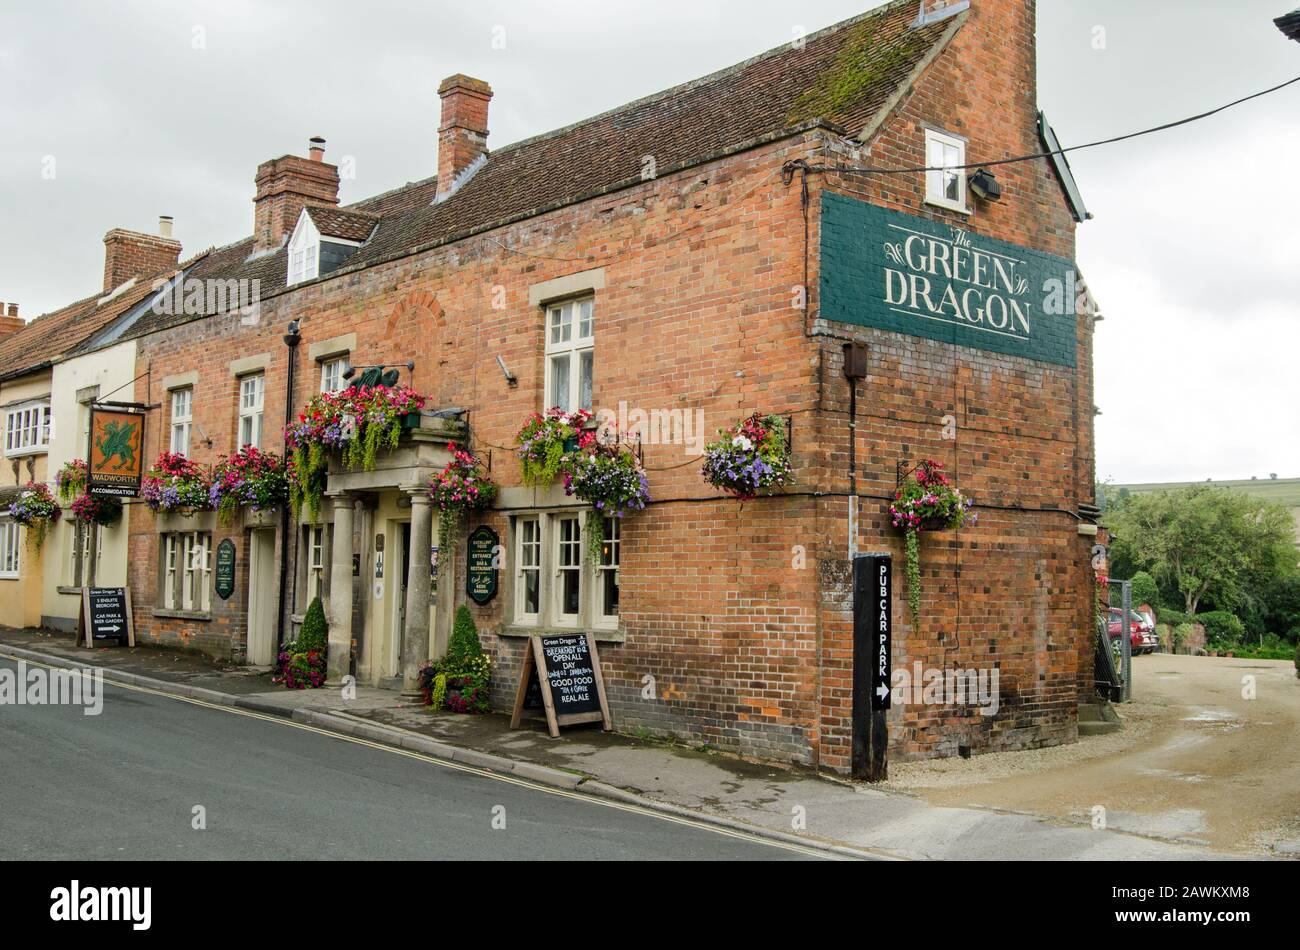 Wiltshire, UK - August 17, 2019: The historic Green Dragon public house in the village of Market Lavington in Wiltshire, England. Stock Photo